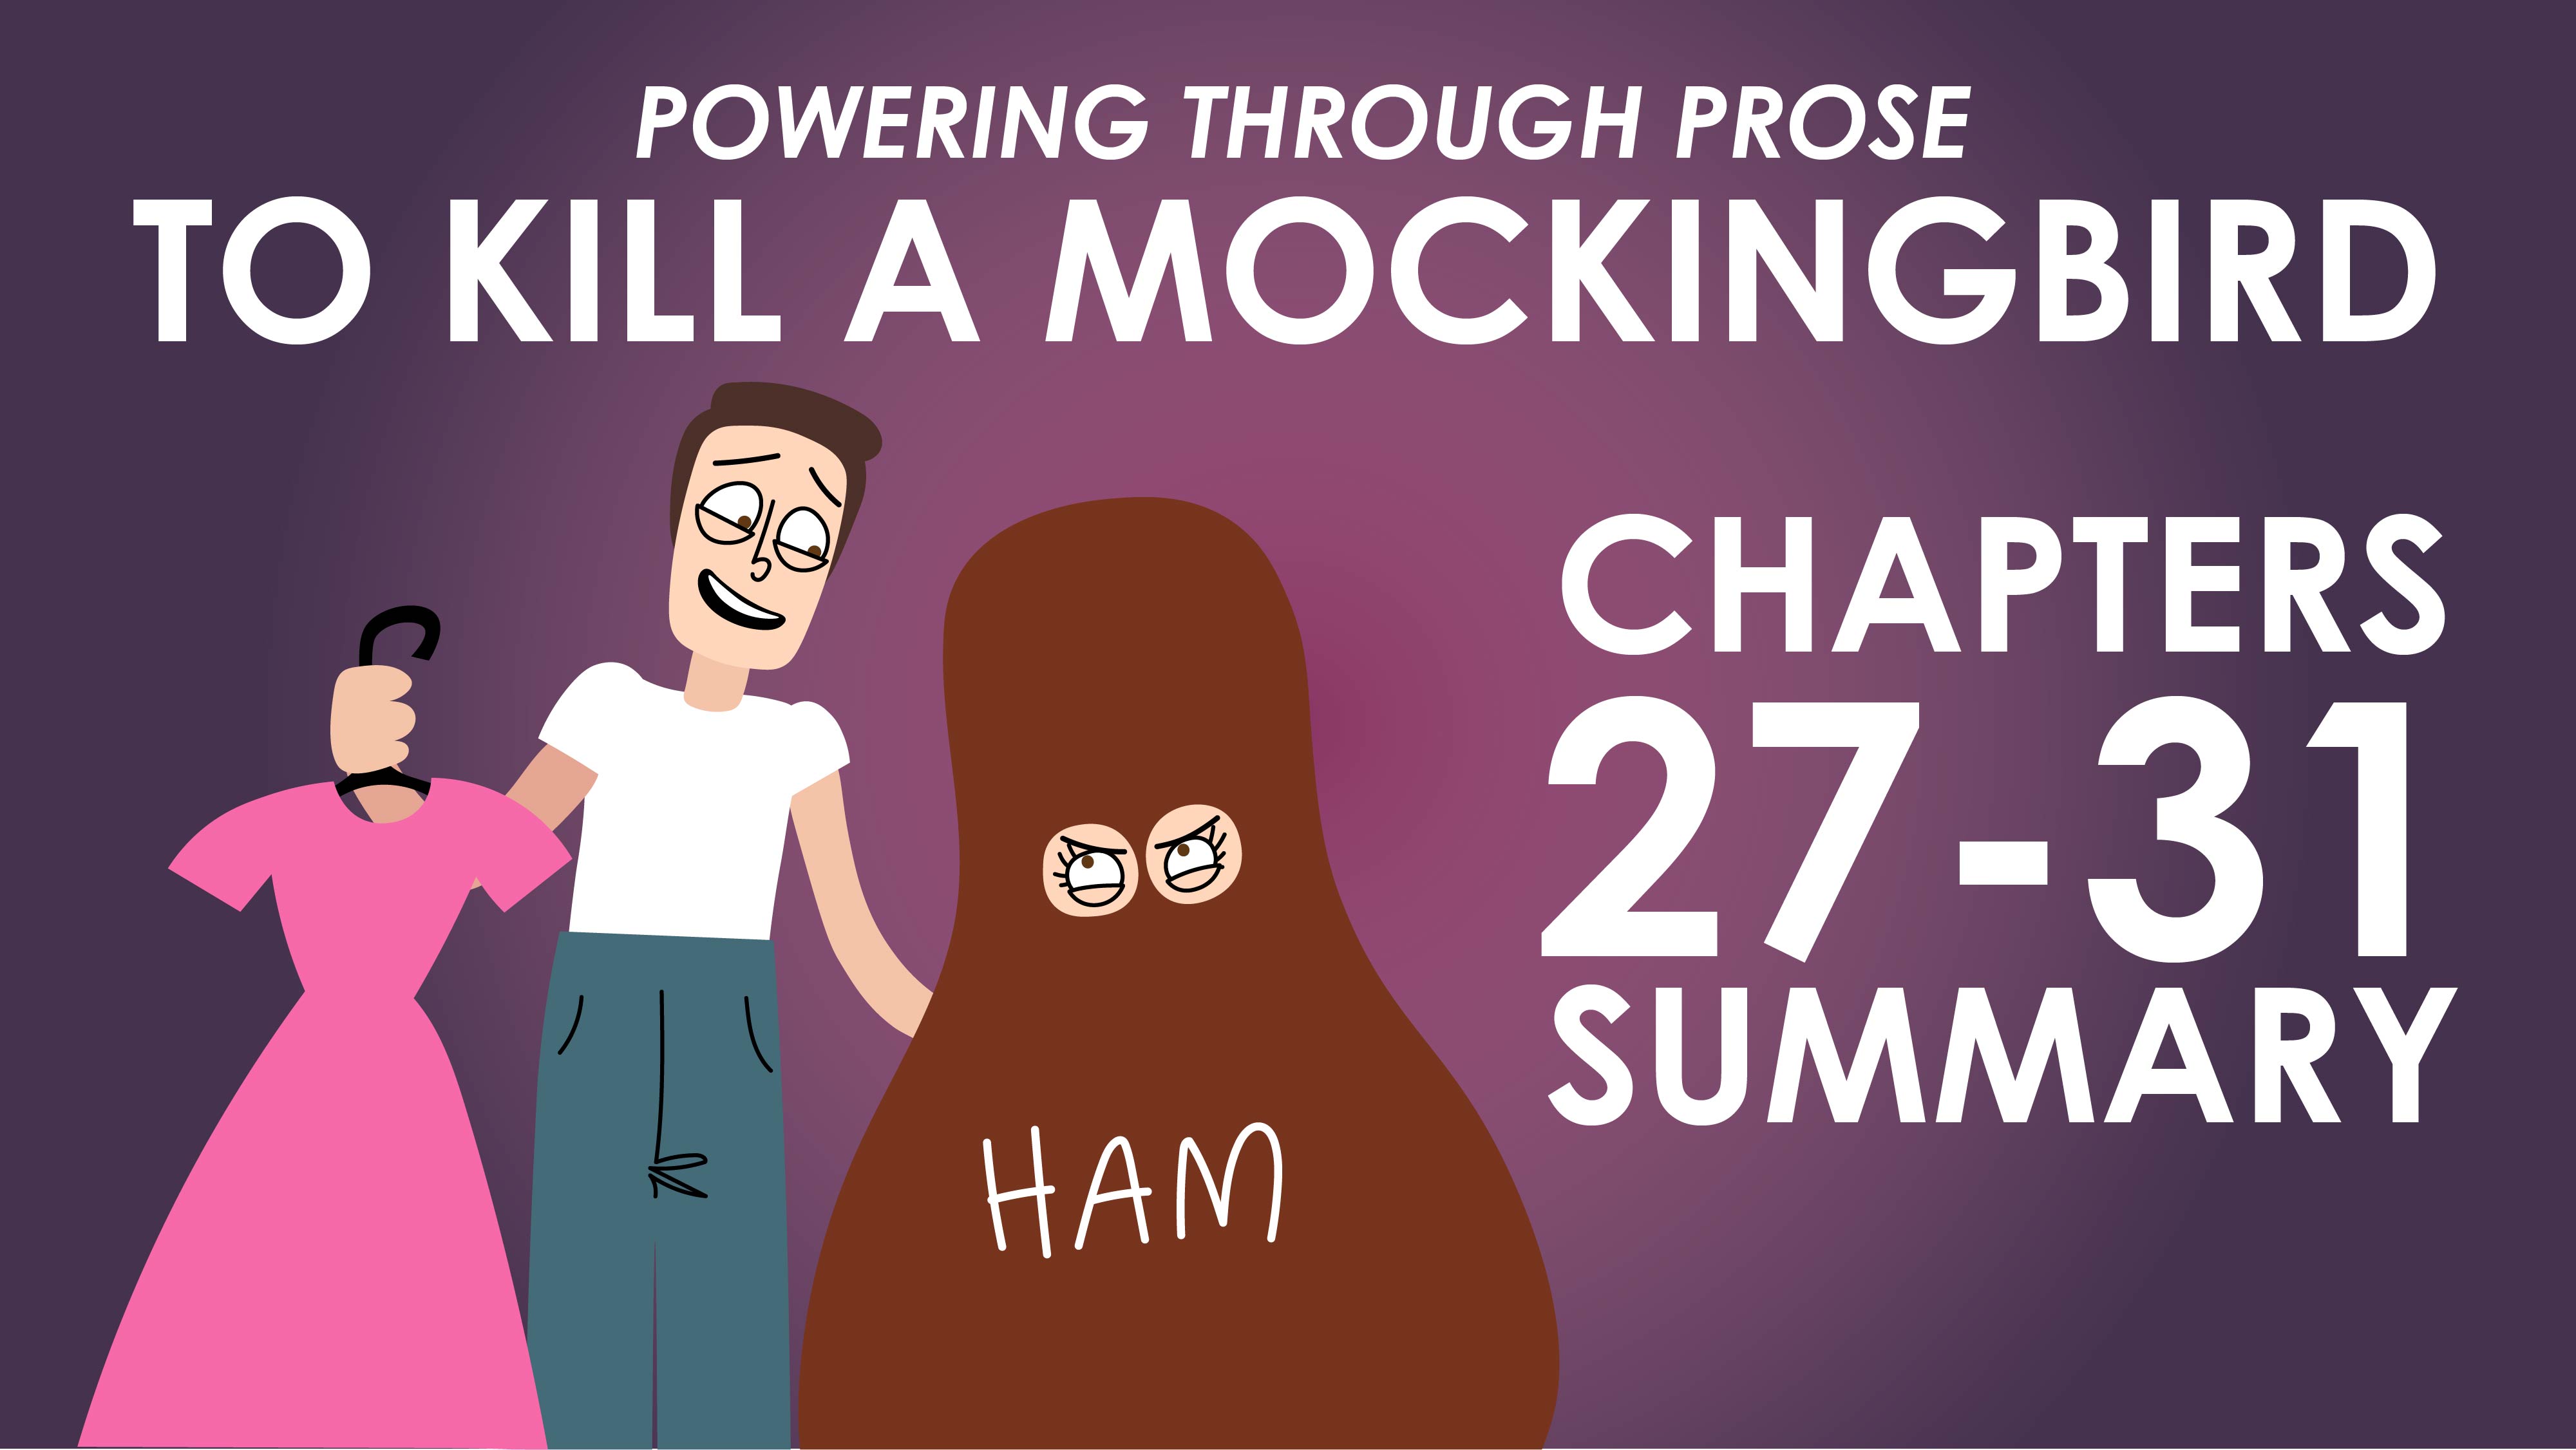 To Kill a Mockingbird - Harper Lee - Chapters 27-31 Summary - Powering Through Prose Series